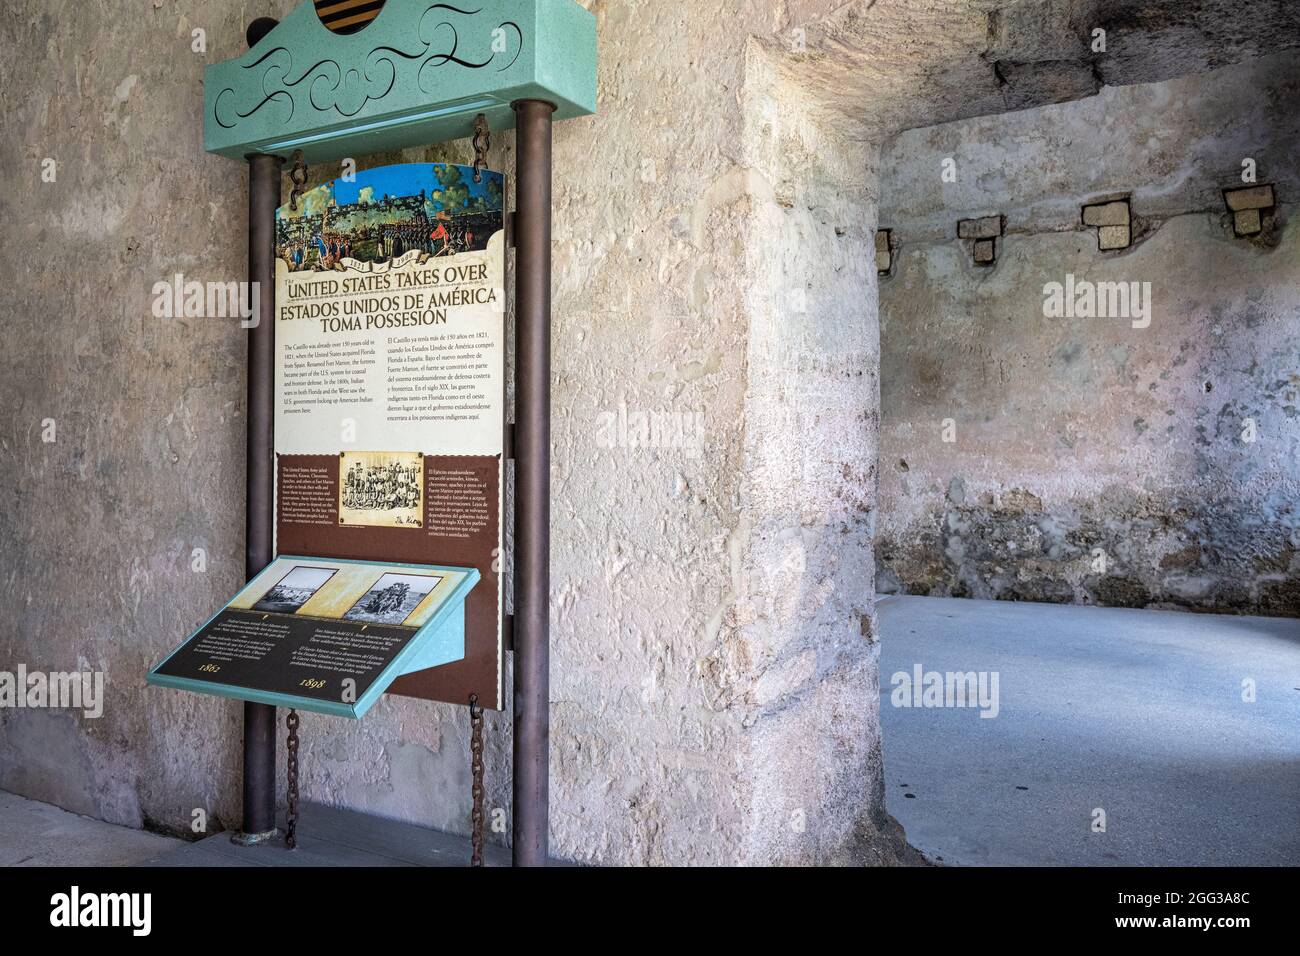 Interior of the 17th century Castillo de San Marcos, the oldest masonry fort in the continental United States, on Matanzas Bay in St. Augustine, FL. Stock Photo